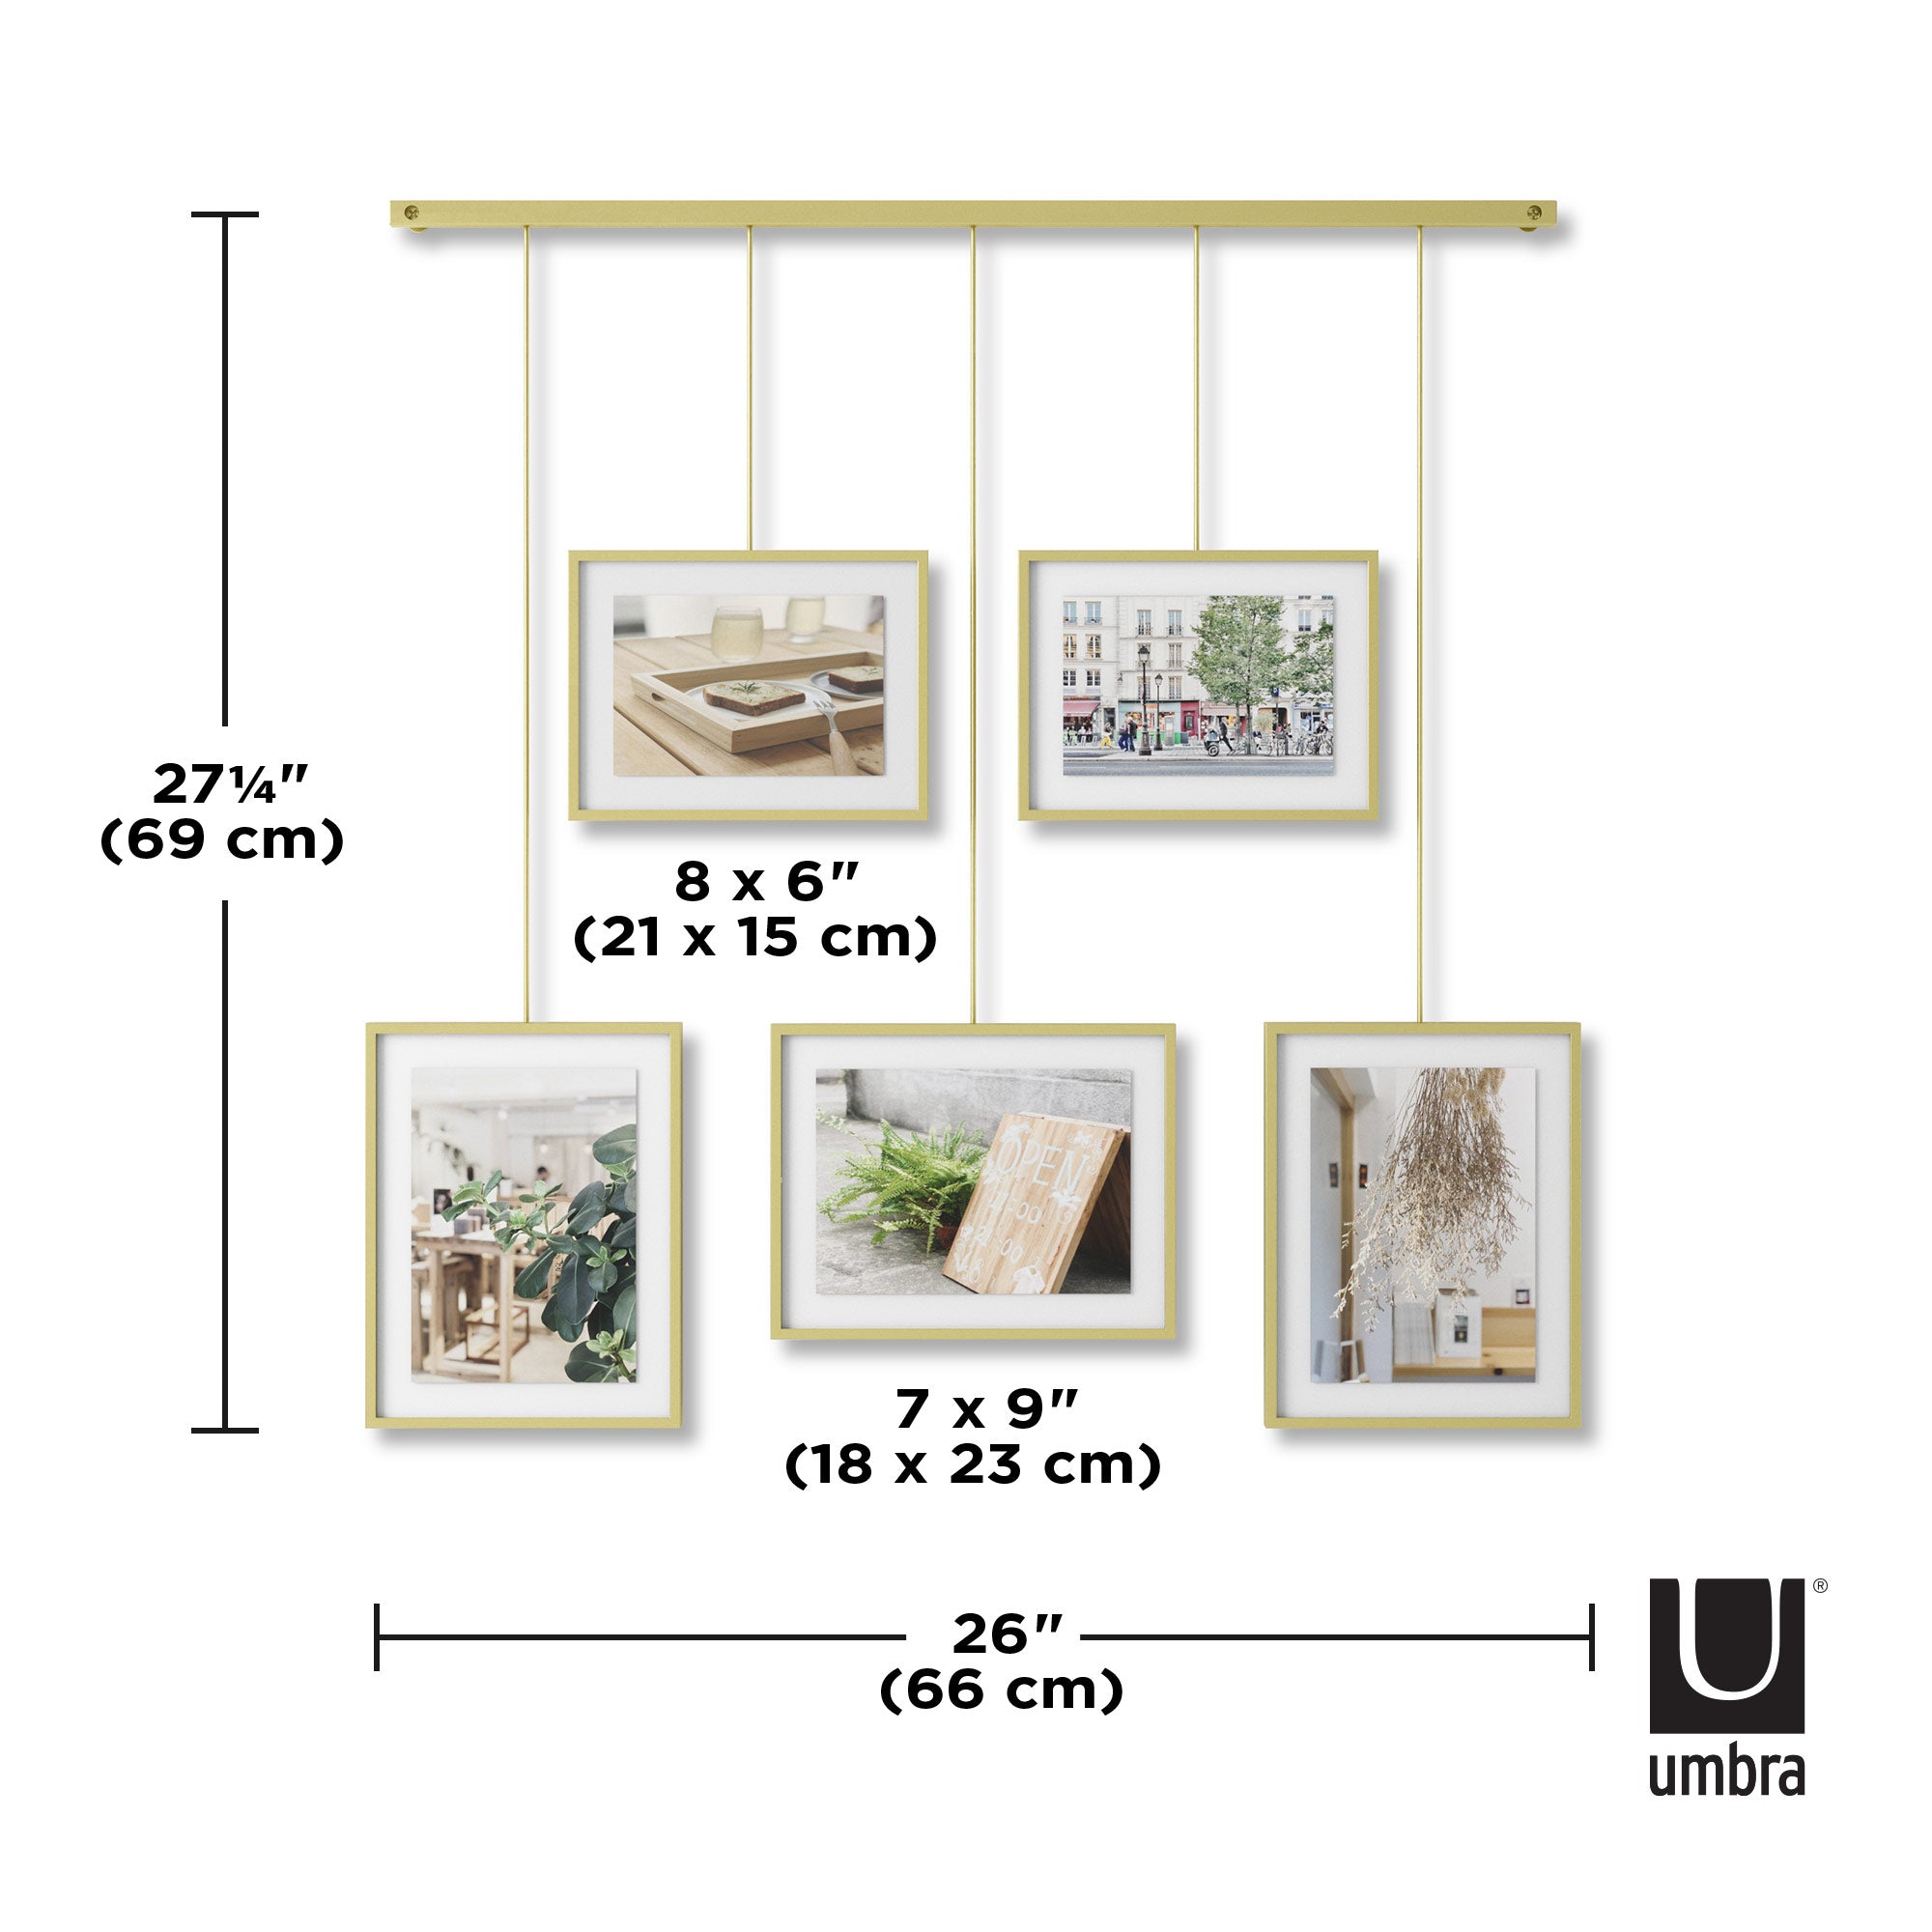 Exhibit Gallery Picture Frame Set